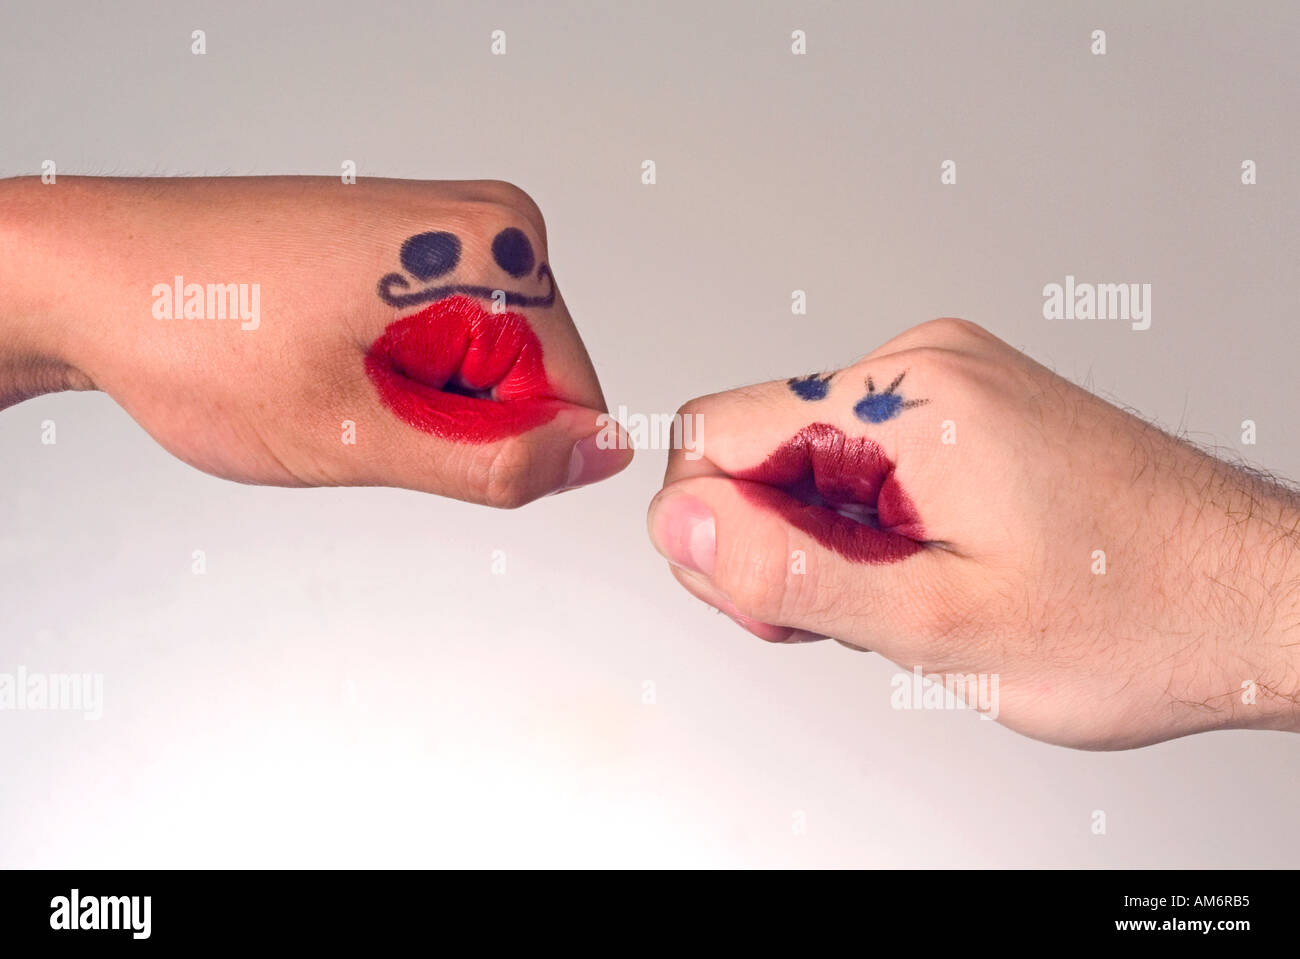 Hands with funny faces drawn on with lipstick Stock Photo